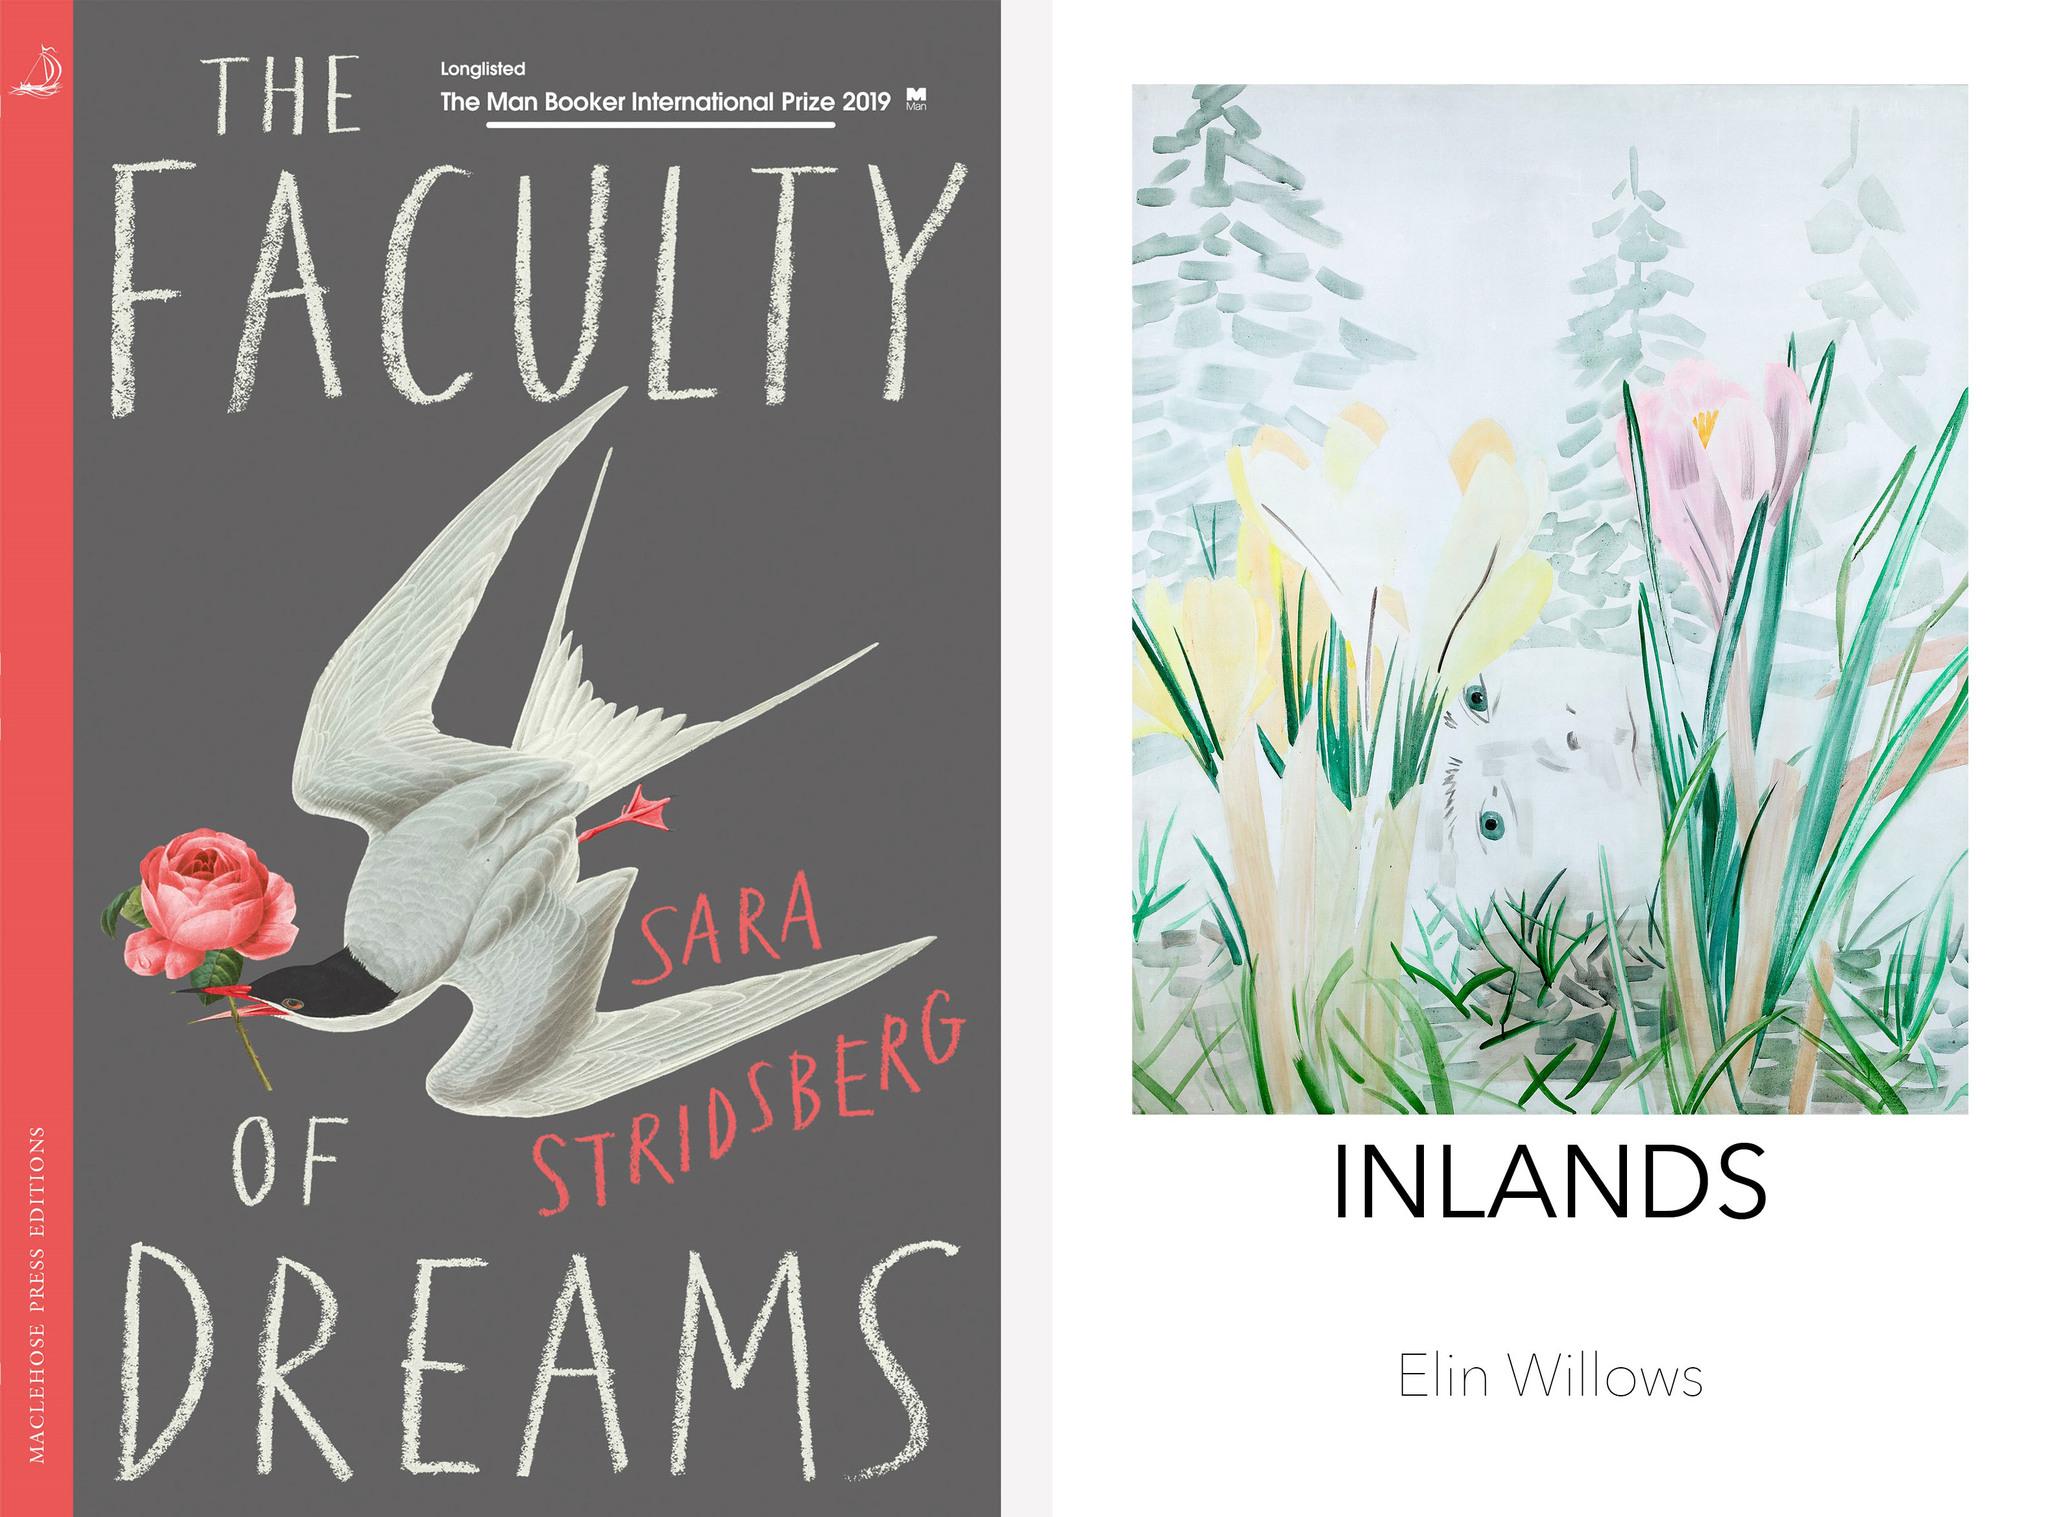 Left: Cover of the book The Faculty of Dreams, with a big bird and the title on. Right: Cover of the book Inlands with illustrated flowers and the title on.